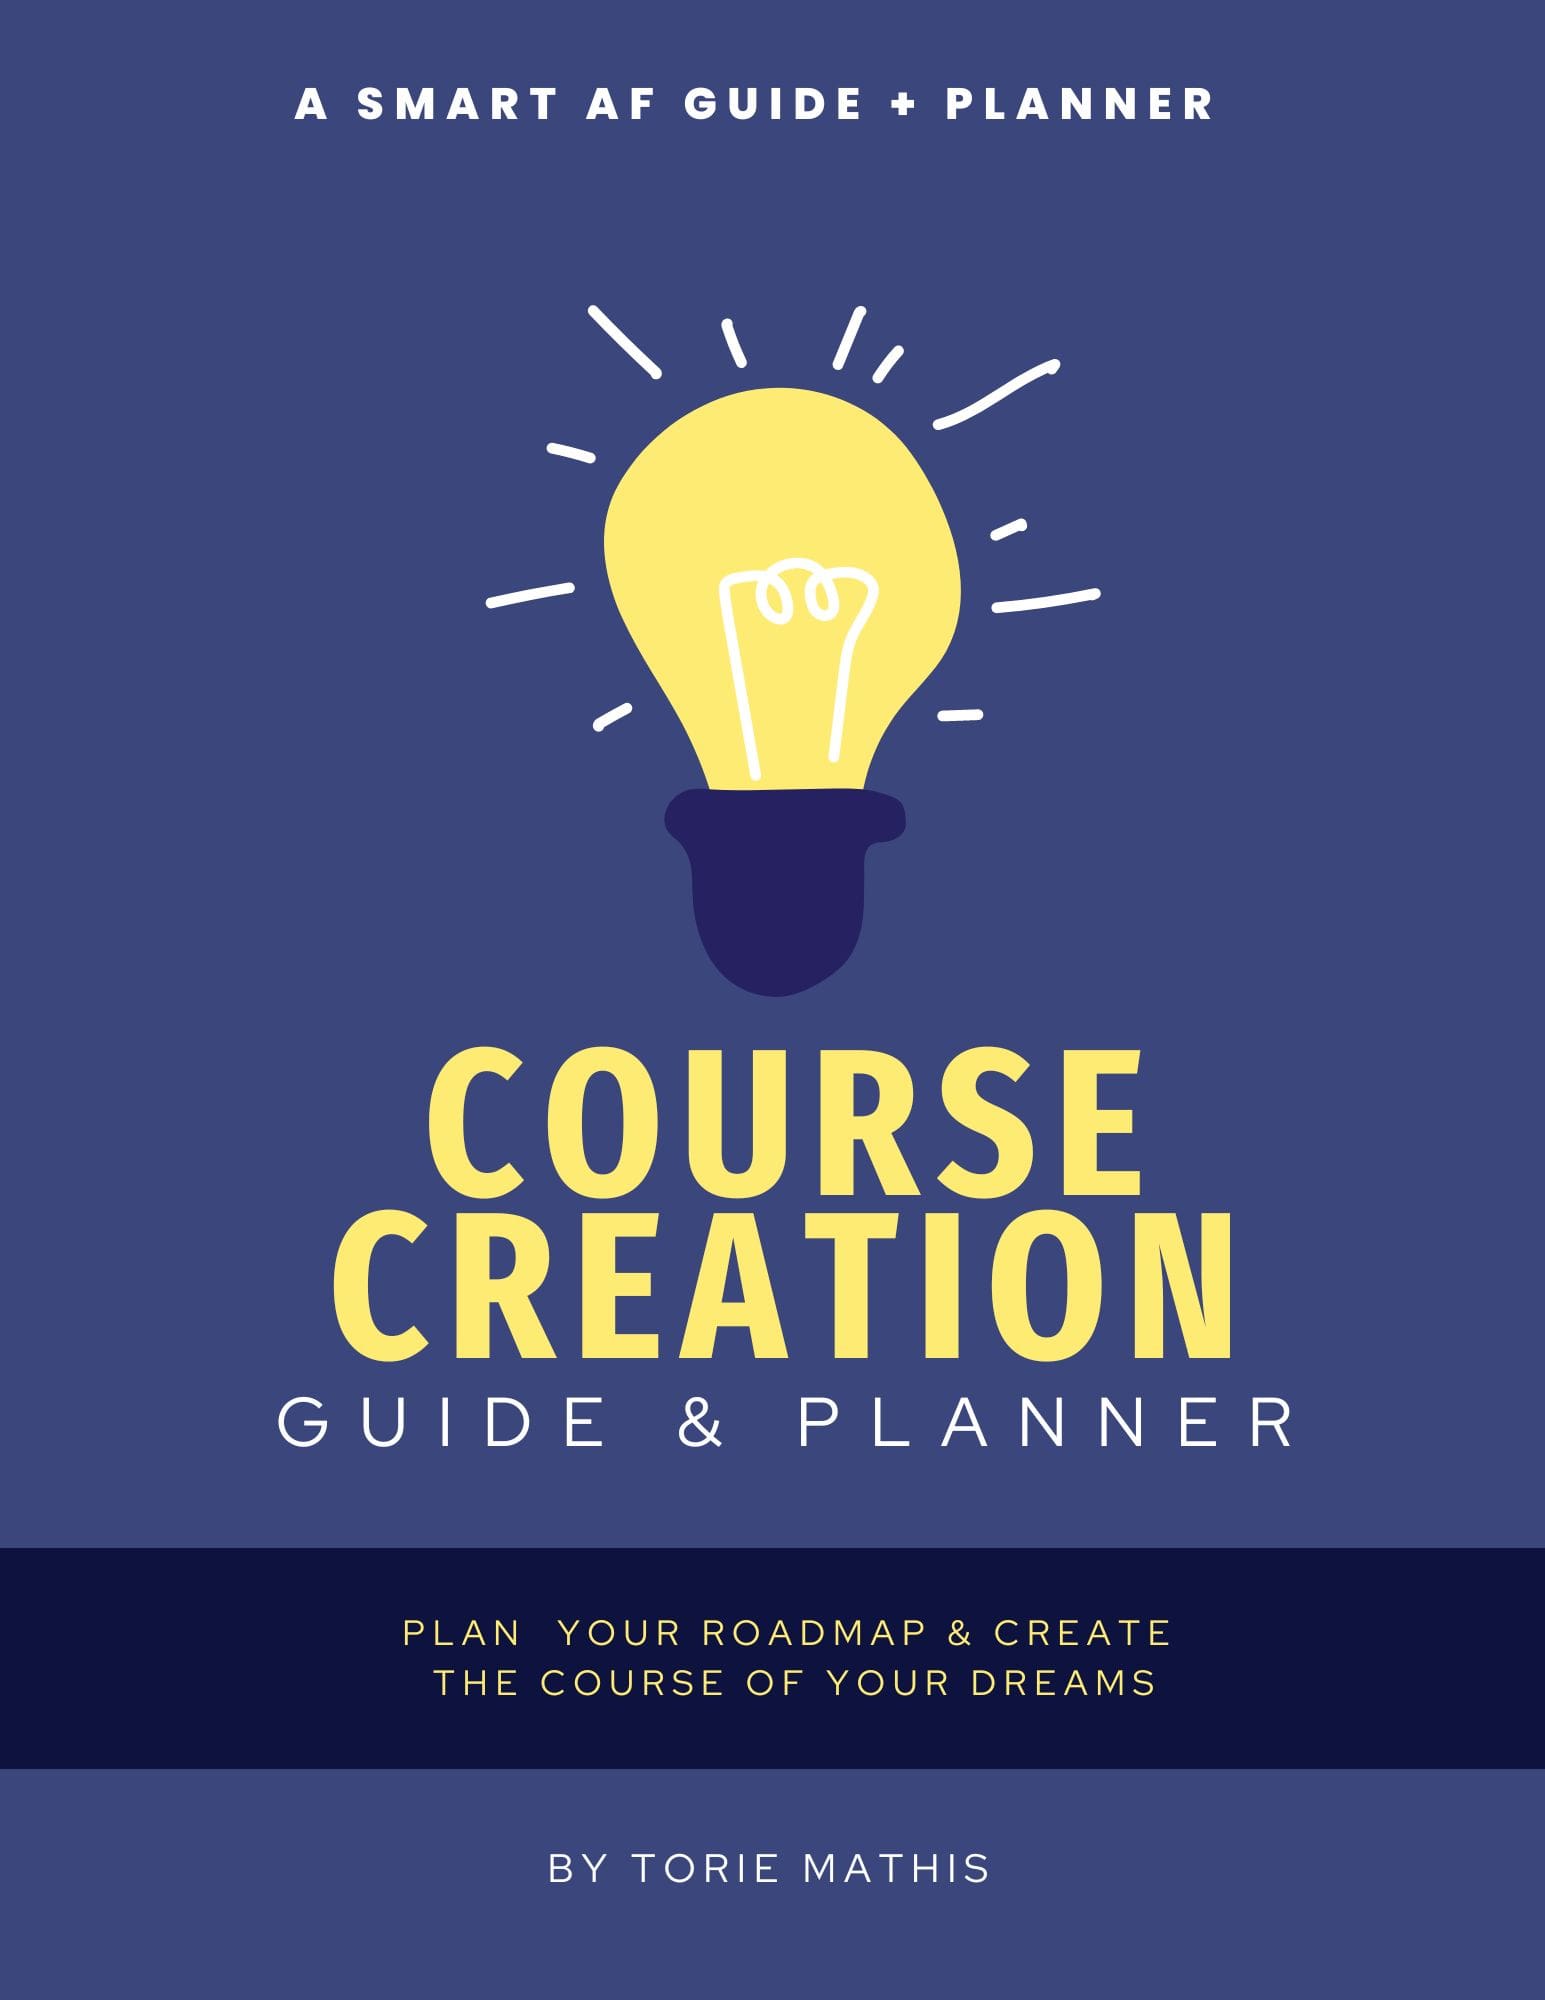 Course Creation Guide and Planner by Torie Mathis